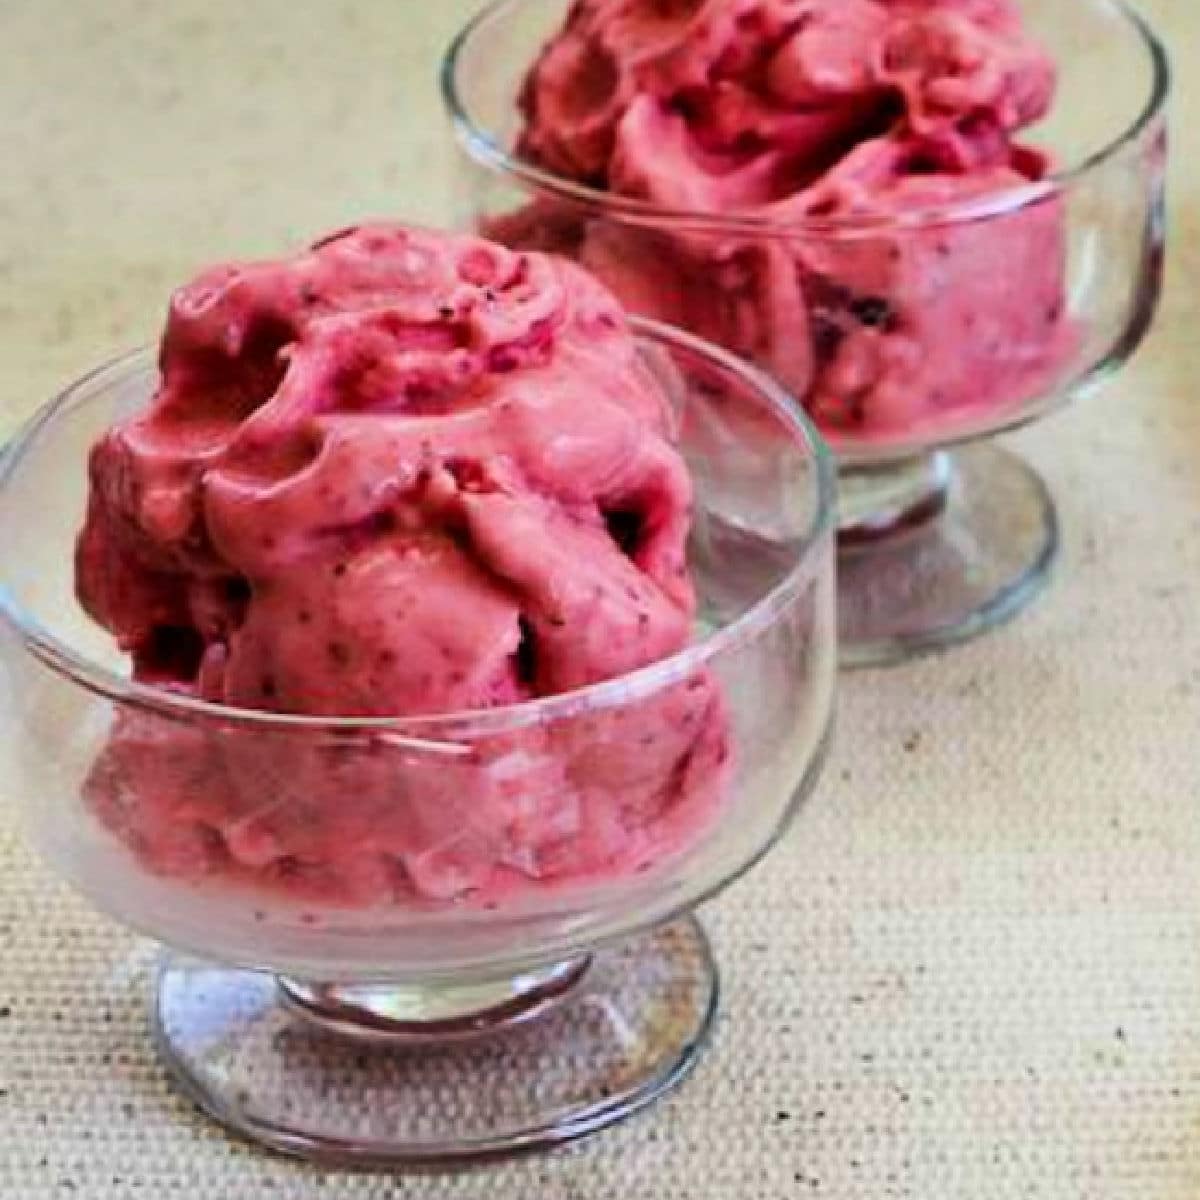 Low-Sugar Strawberry Frozen Yogurt shown in two glass serving dishes.